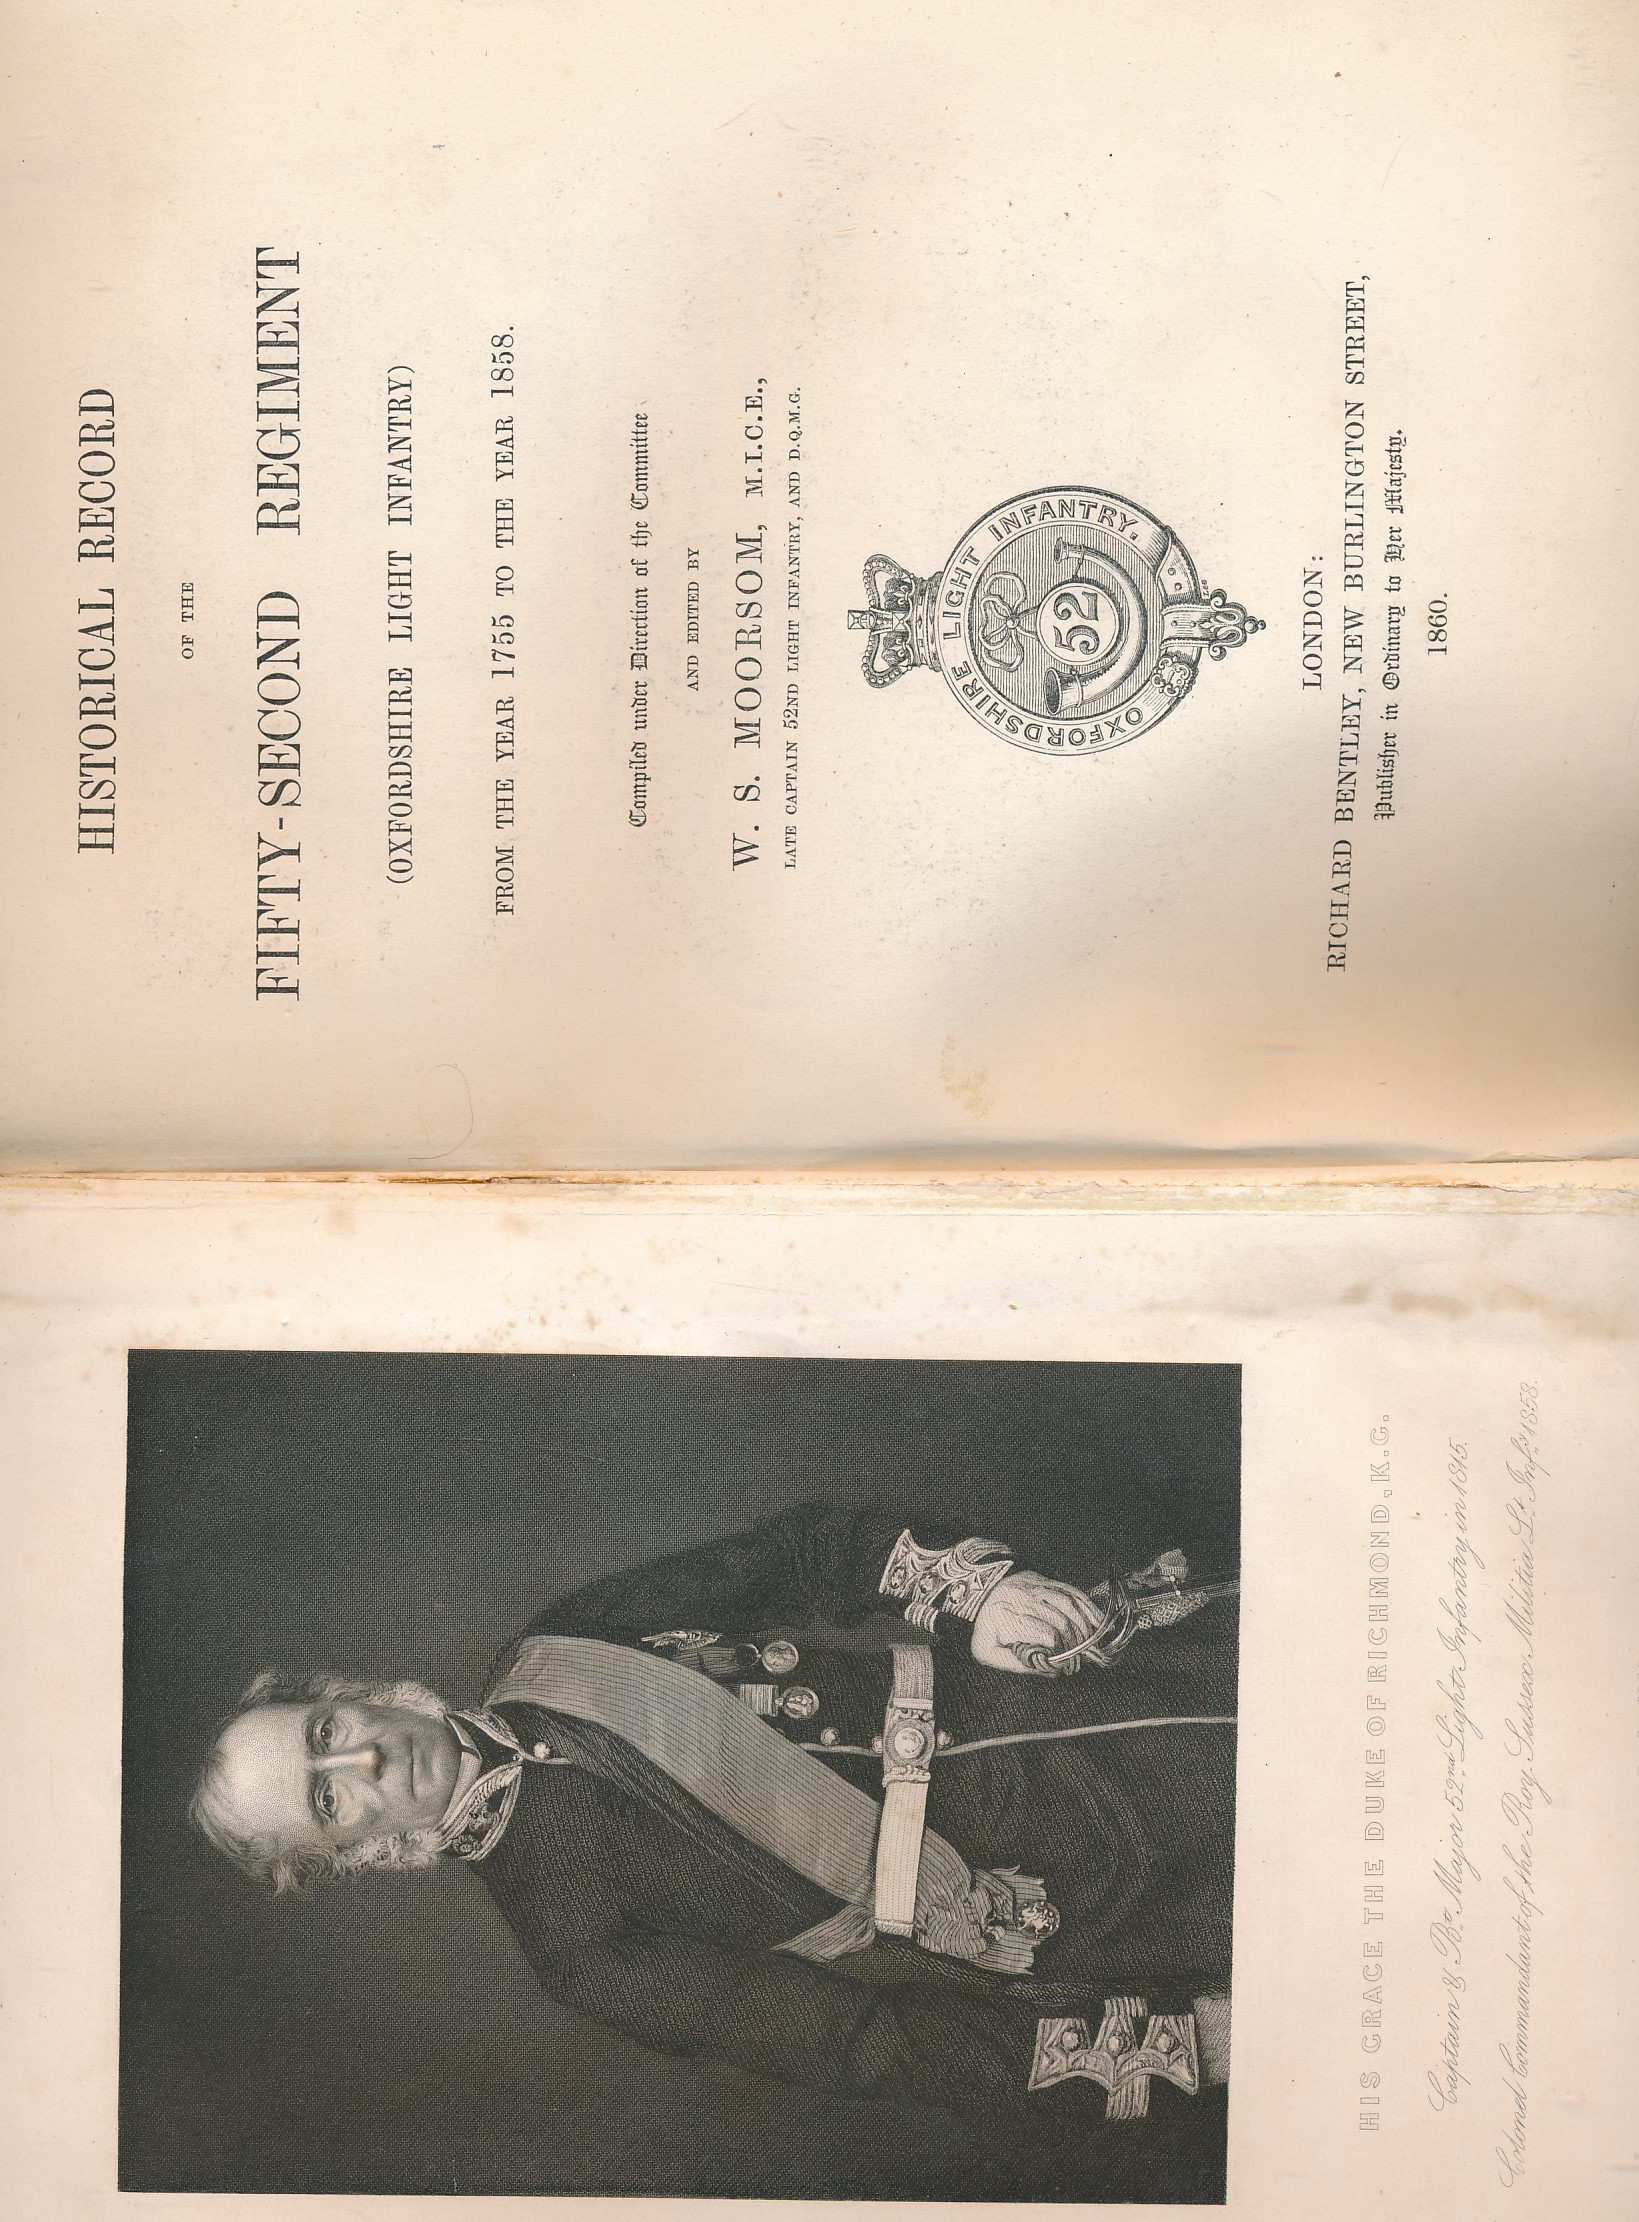 Historical Record of the Fifty-Second Regiment (Oxfordshire Light Infantry) from the Year 1755 to the Year 1858.